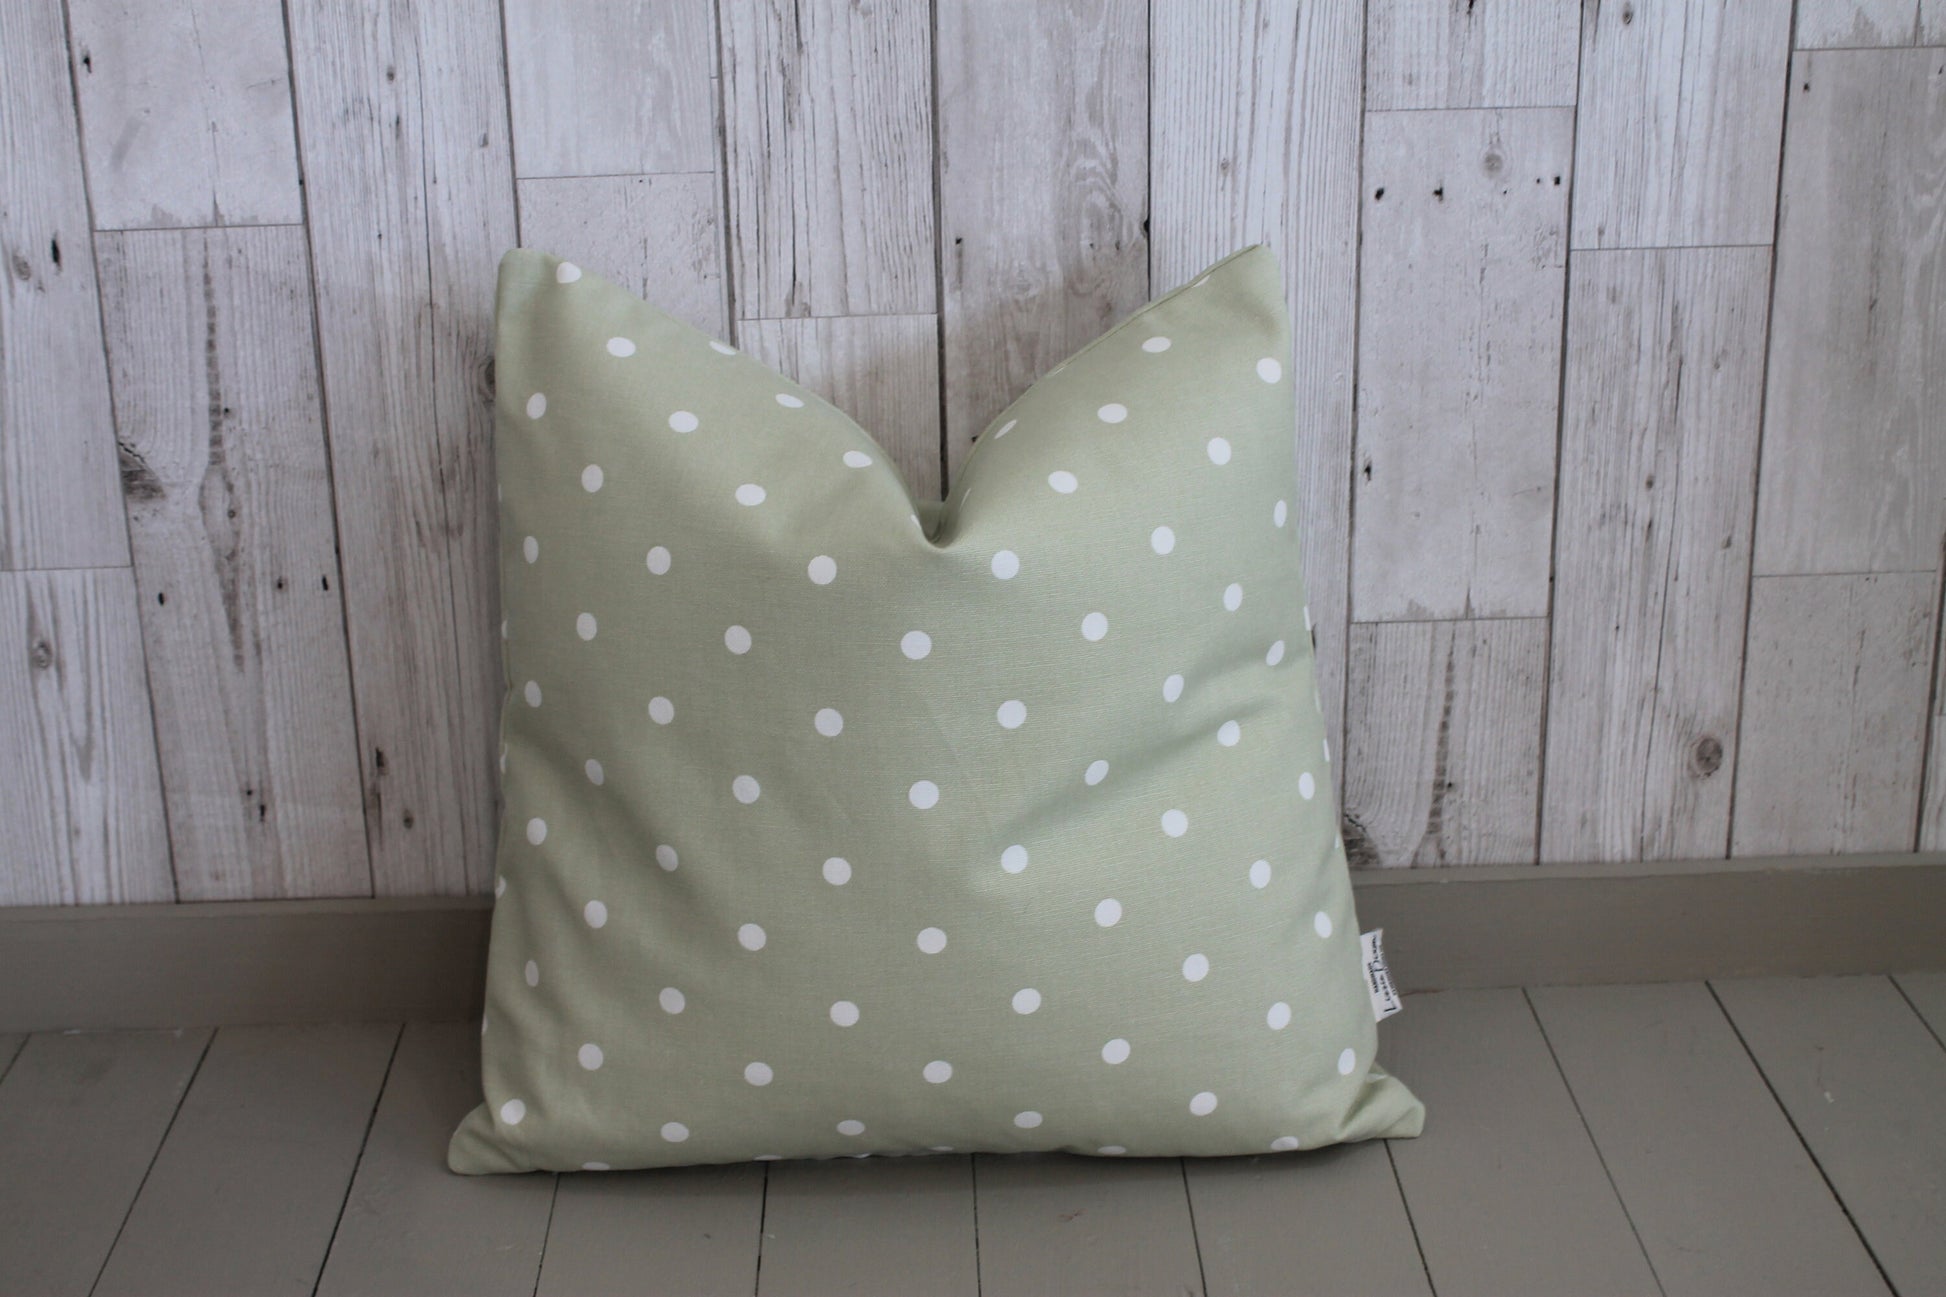 Sage Dotty Cushion 14" x 14" Scatter Cushion-Throw Cushion Polka Dot Cushion -Shabby Chic-cottage chic-Decorative pillow - Scatter pillow,